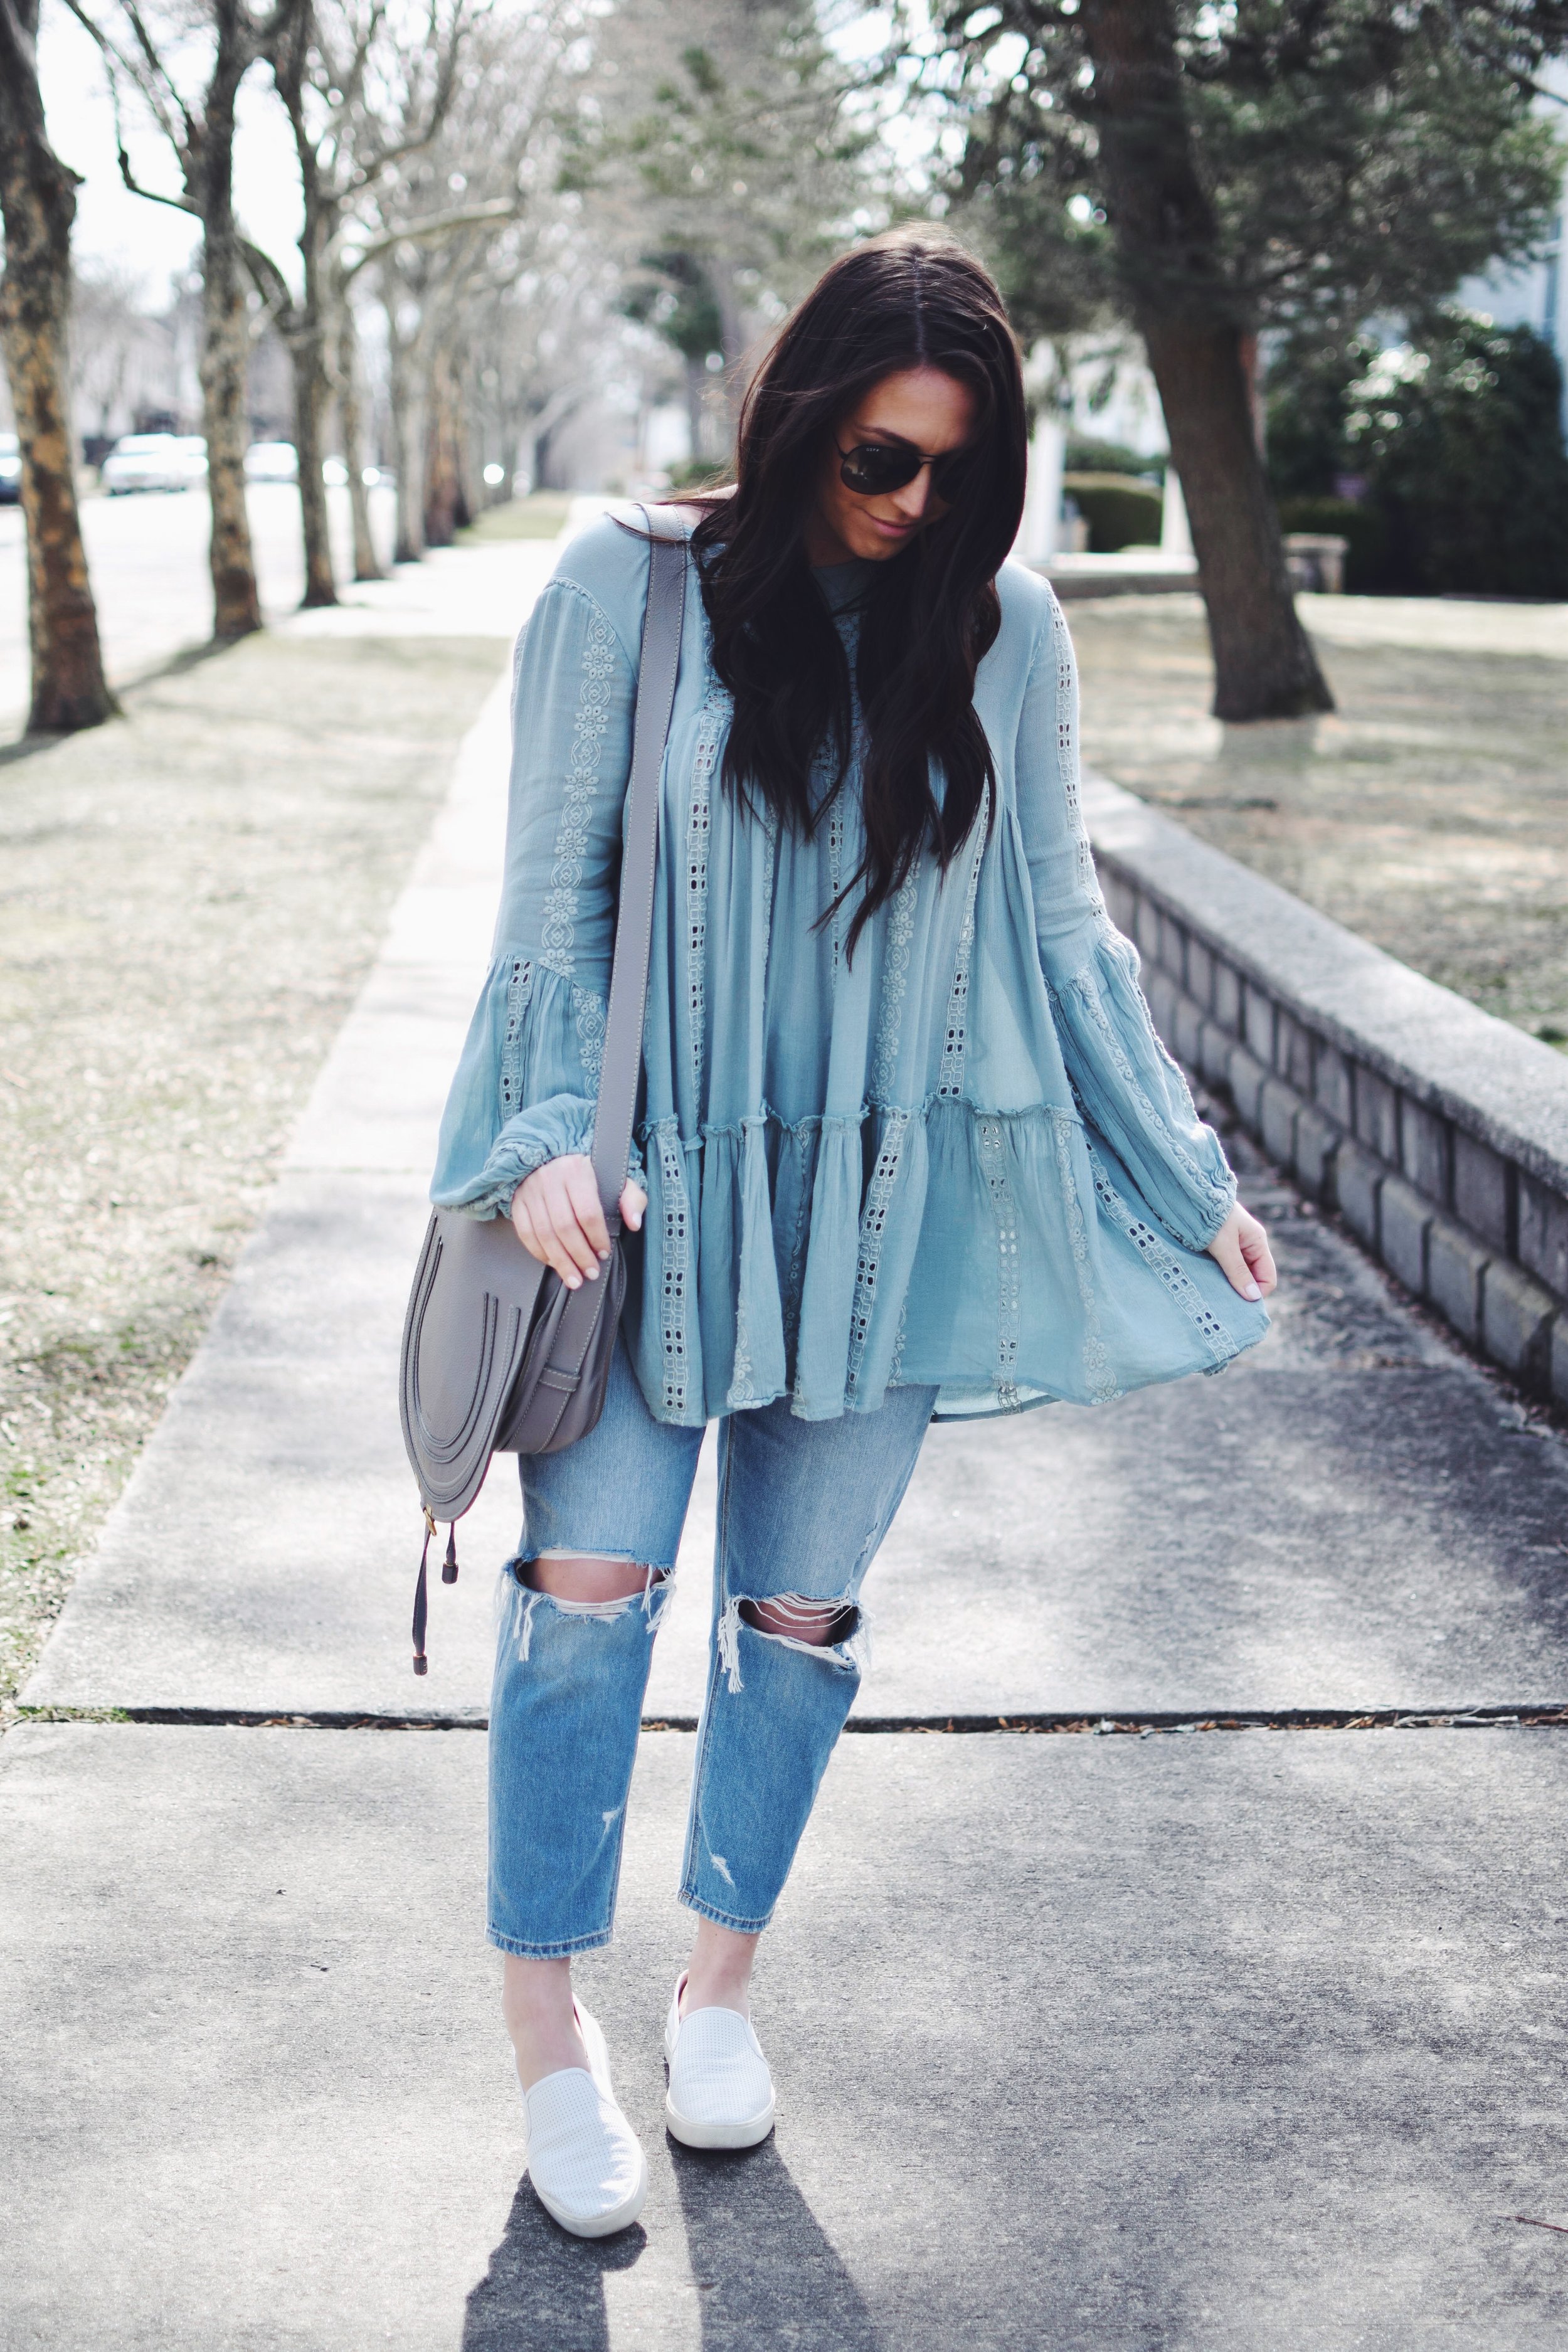 The Prettiest Tunic For Spring